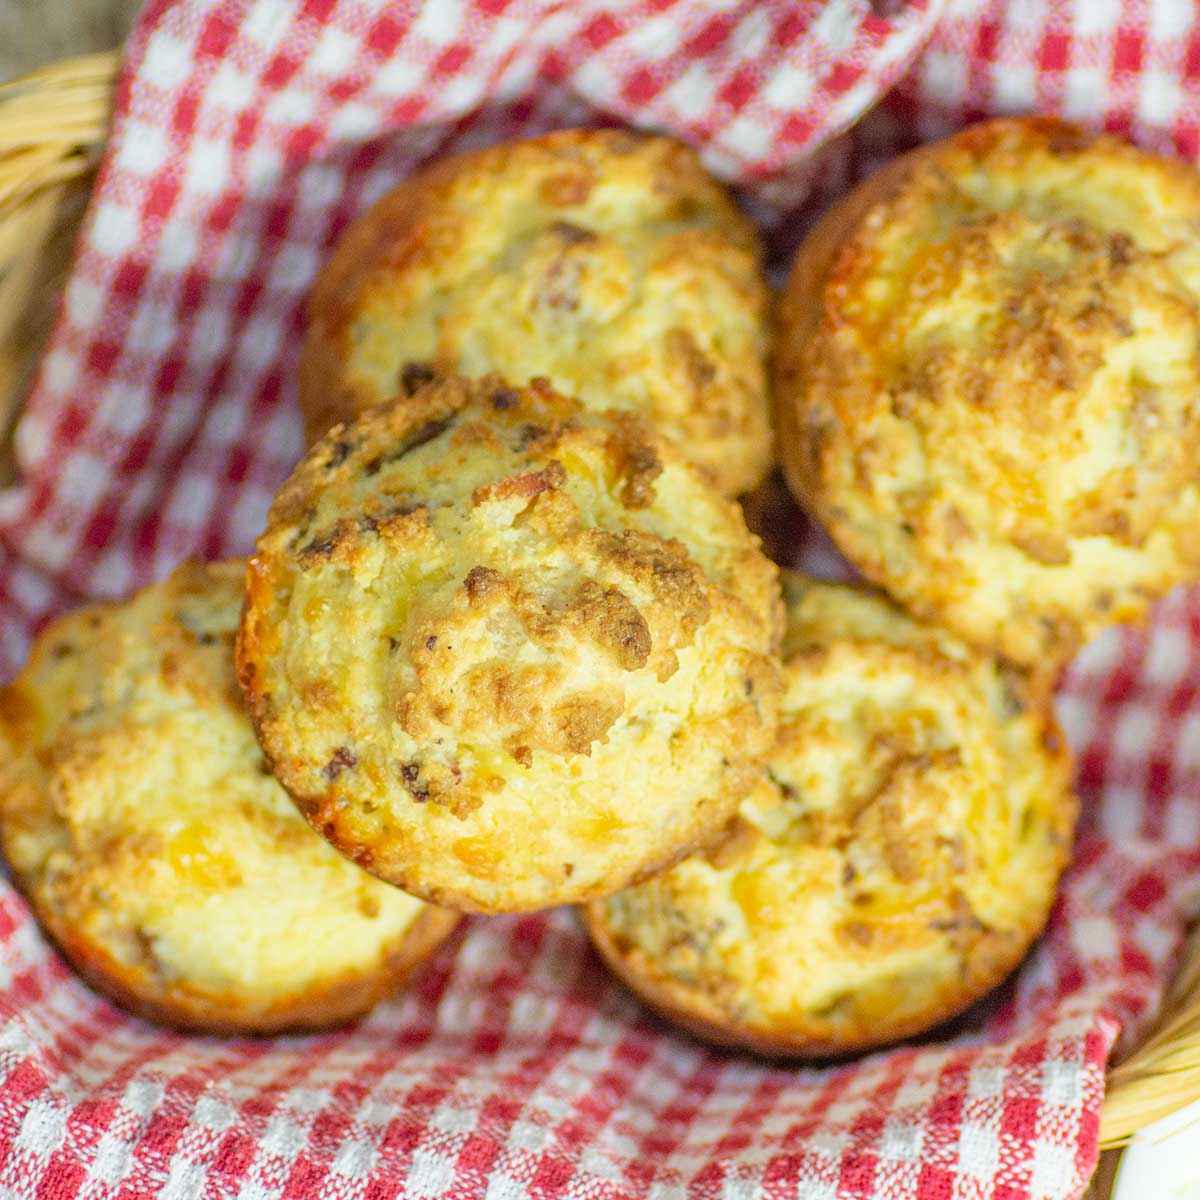 Keto Bacon Sour Cream Muffins in a basket